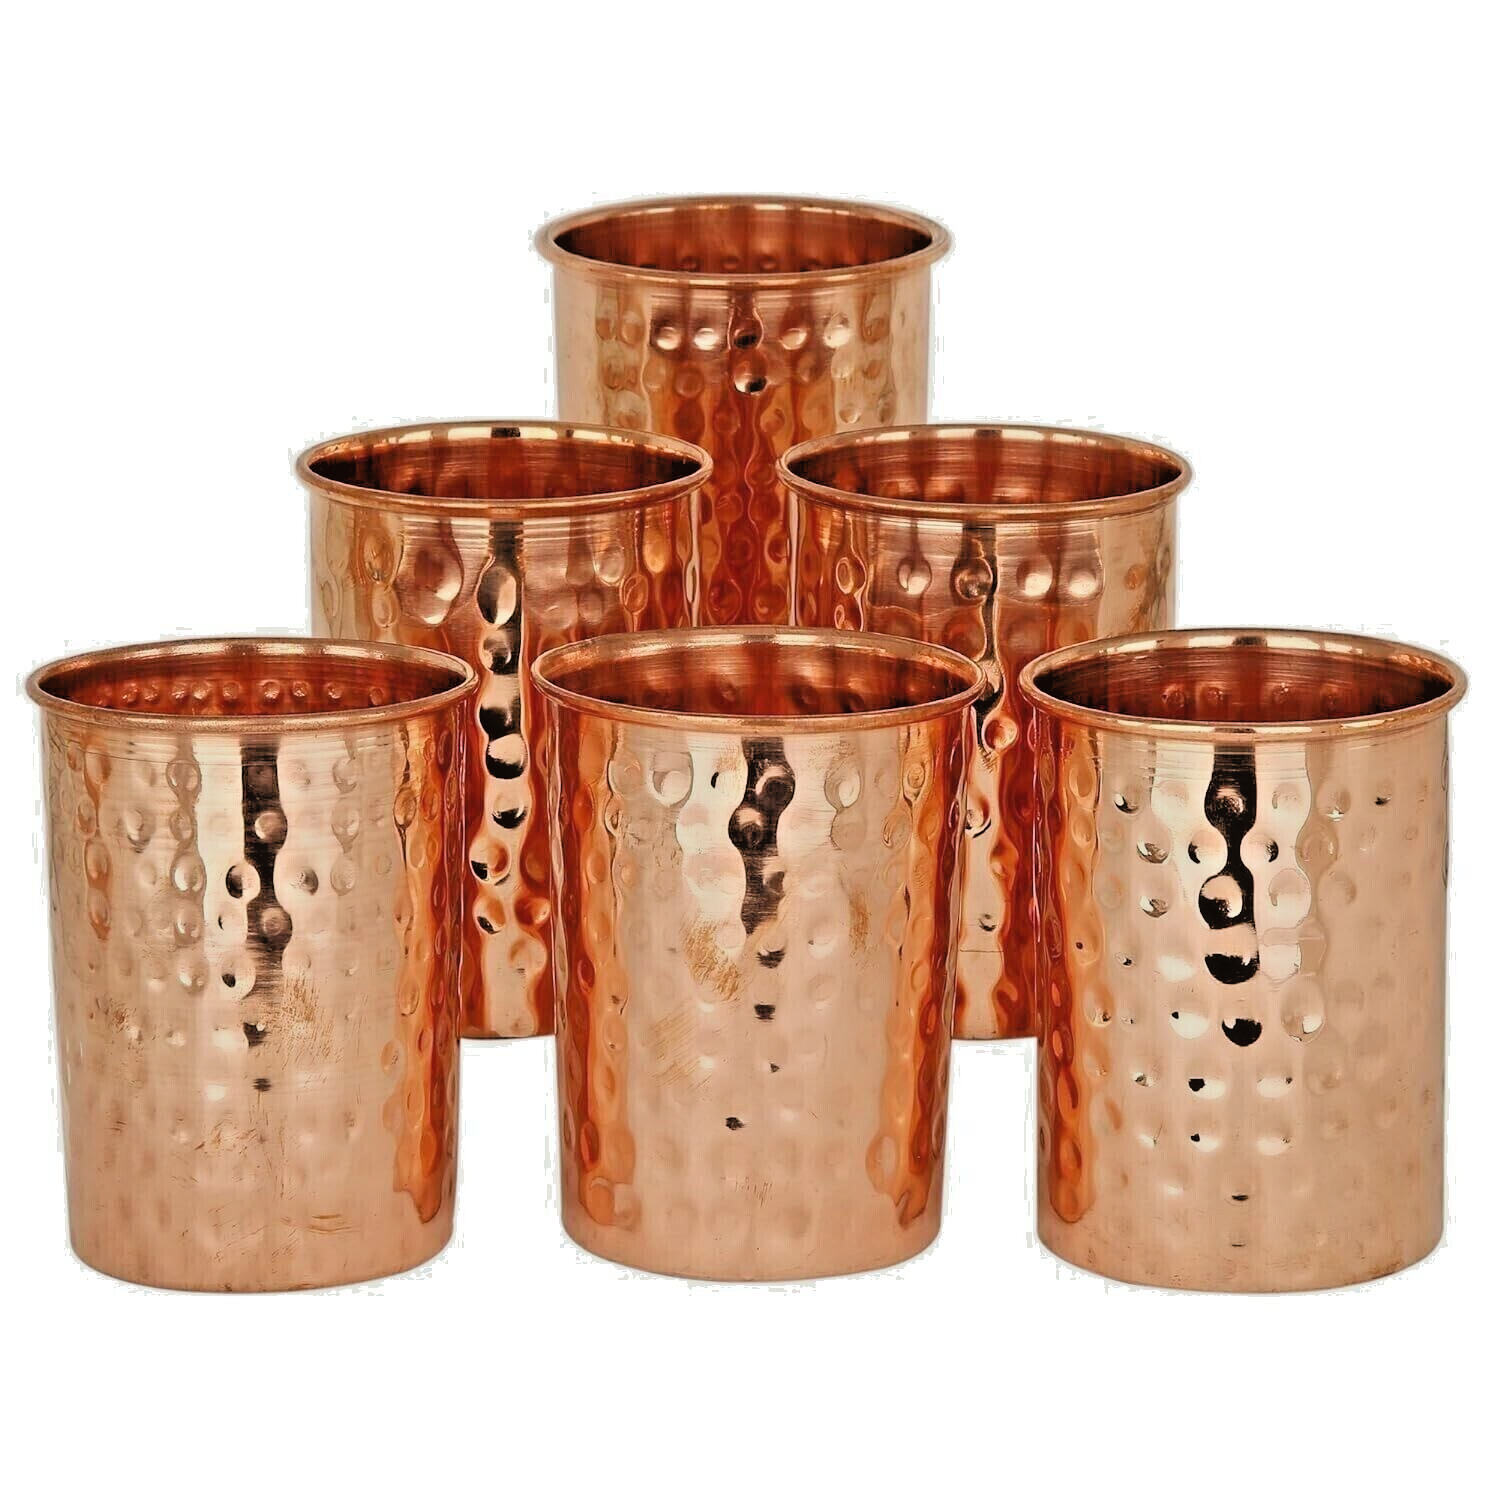 Pure Copper Glass Set, Handcrafted Hammered Cups for Health Benefits - Pack Of 6